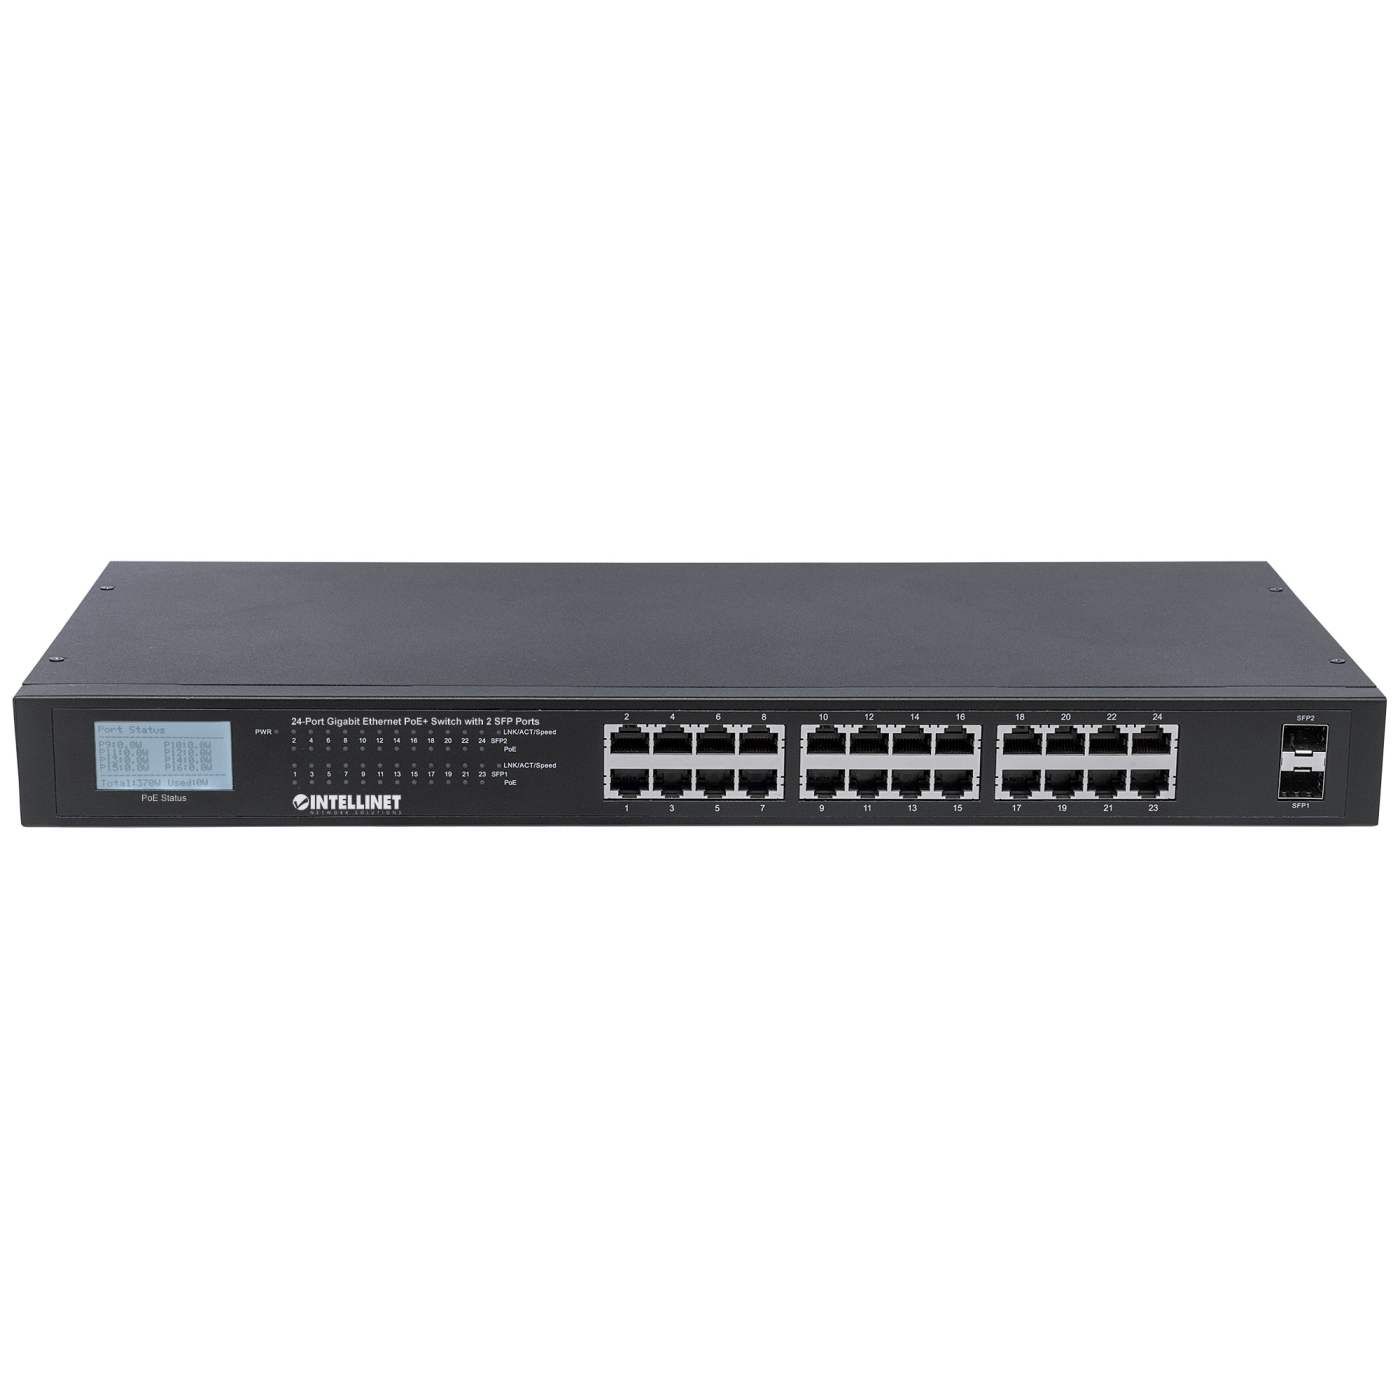 24-Port Gigabit Ethernet PoE+ Switch with 2 SFP Ports and LCD Screen Image 7